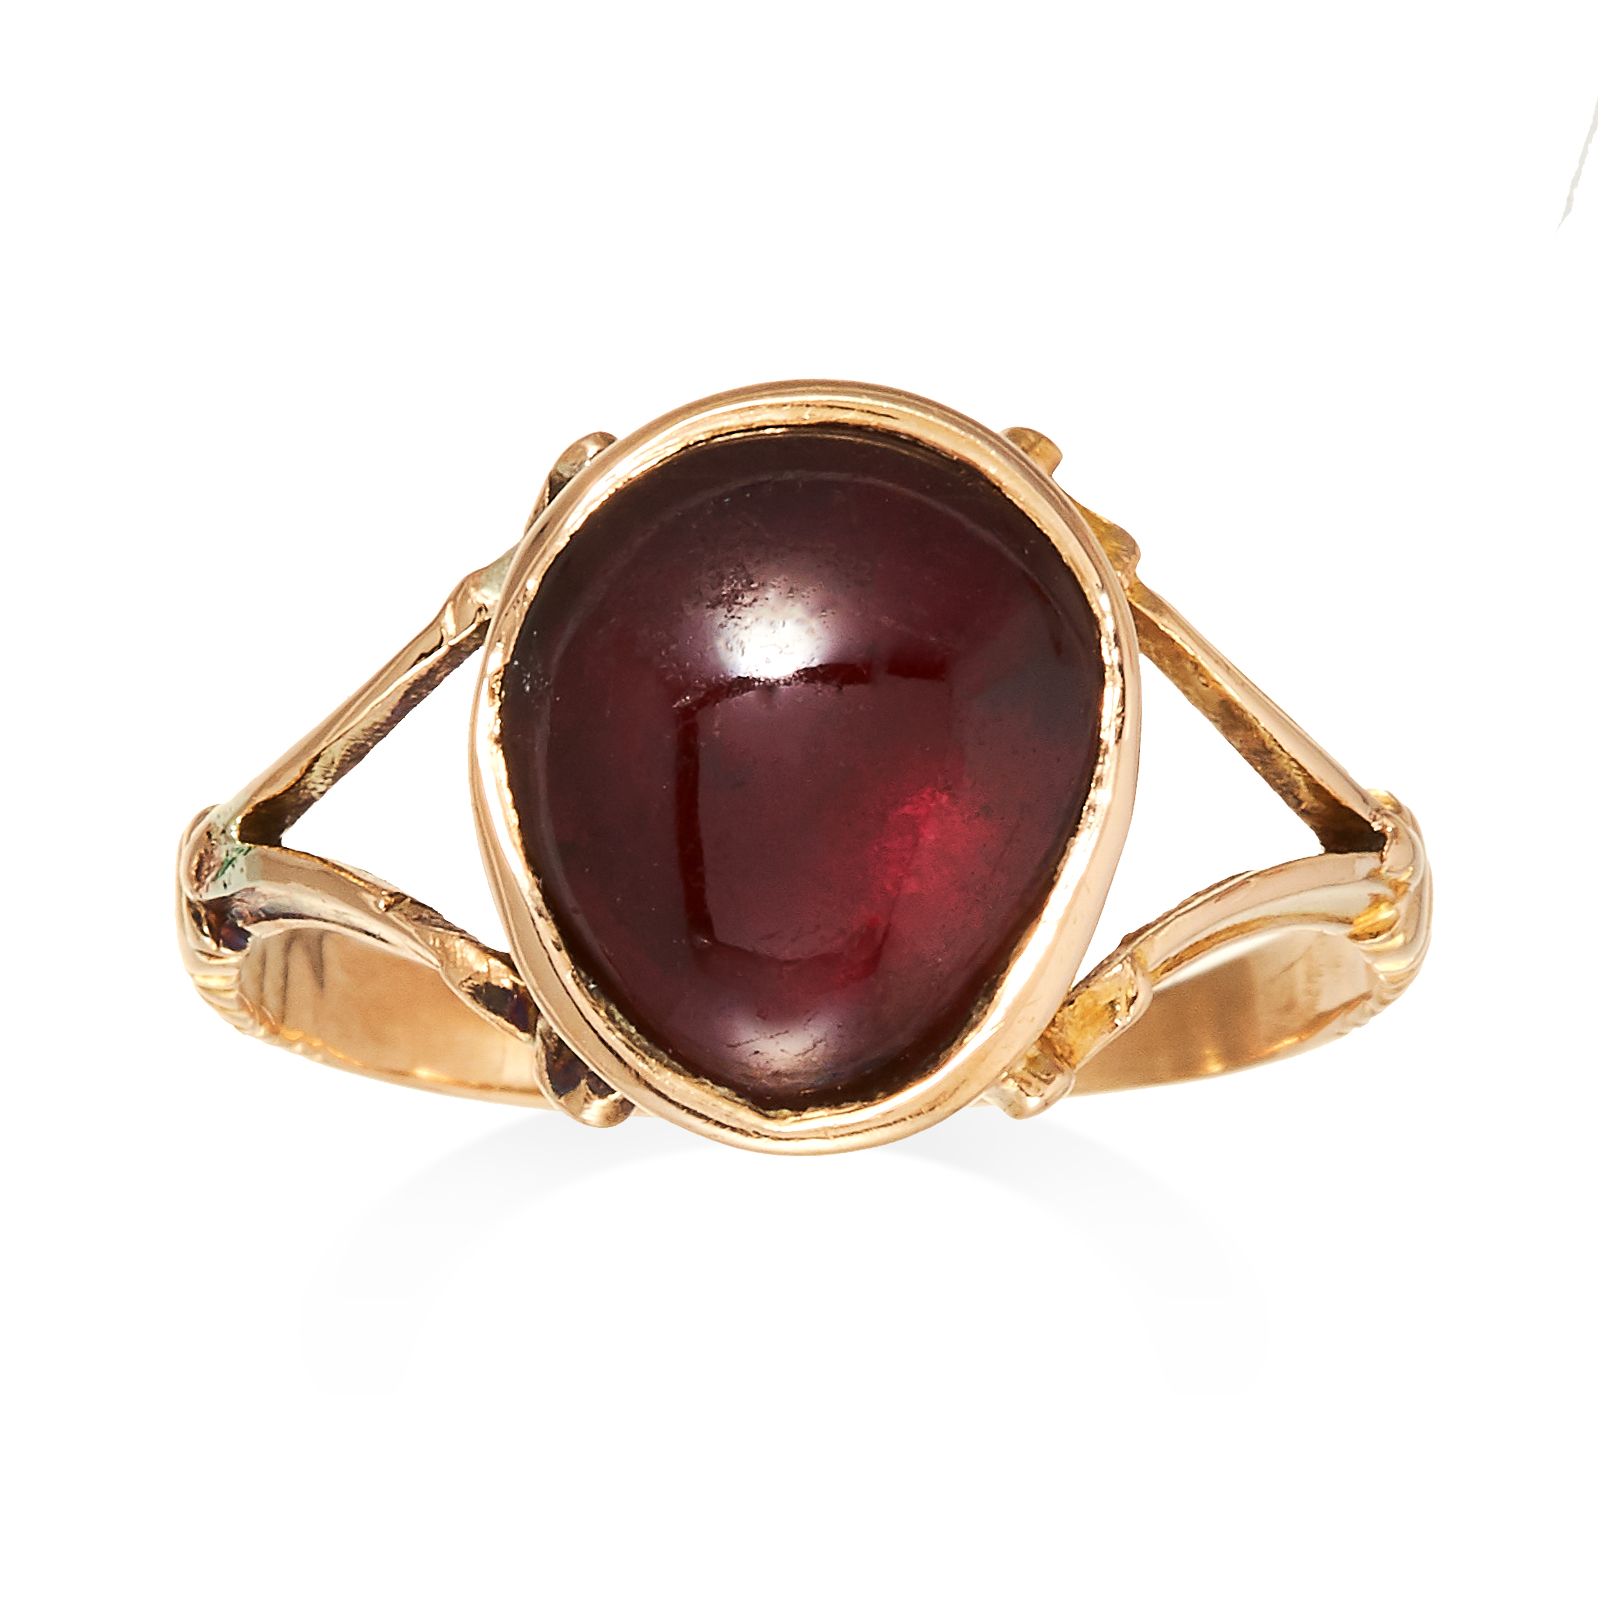 AN ANTIQUE GARNET RING, 19TH CENTURY in yellow gold, set with a large oval cabochon garnet on a